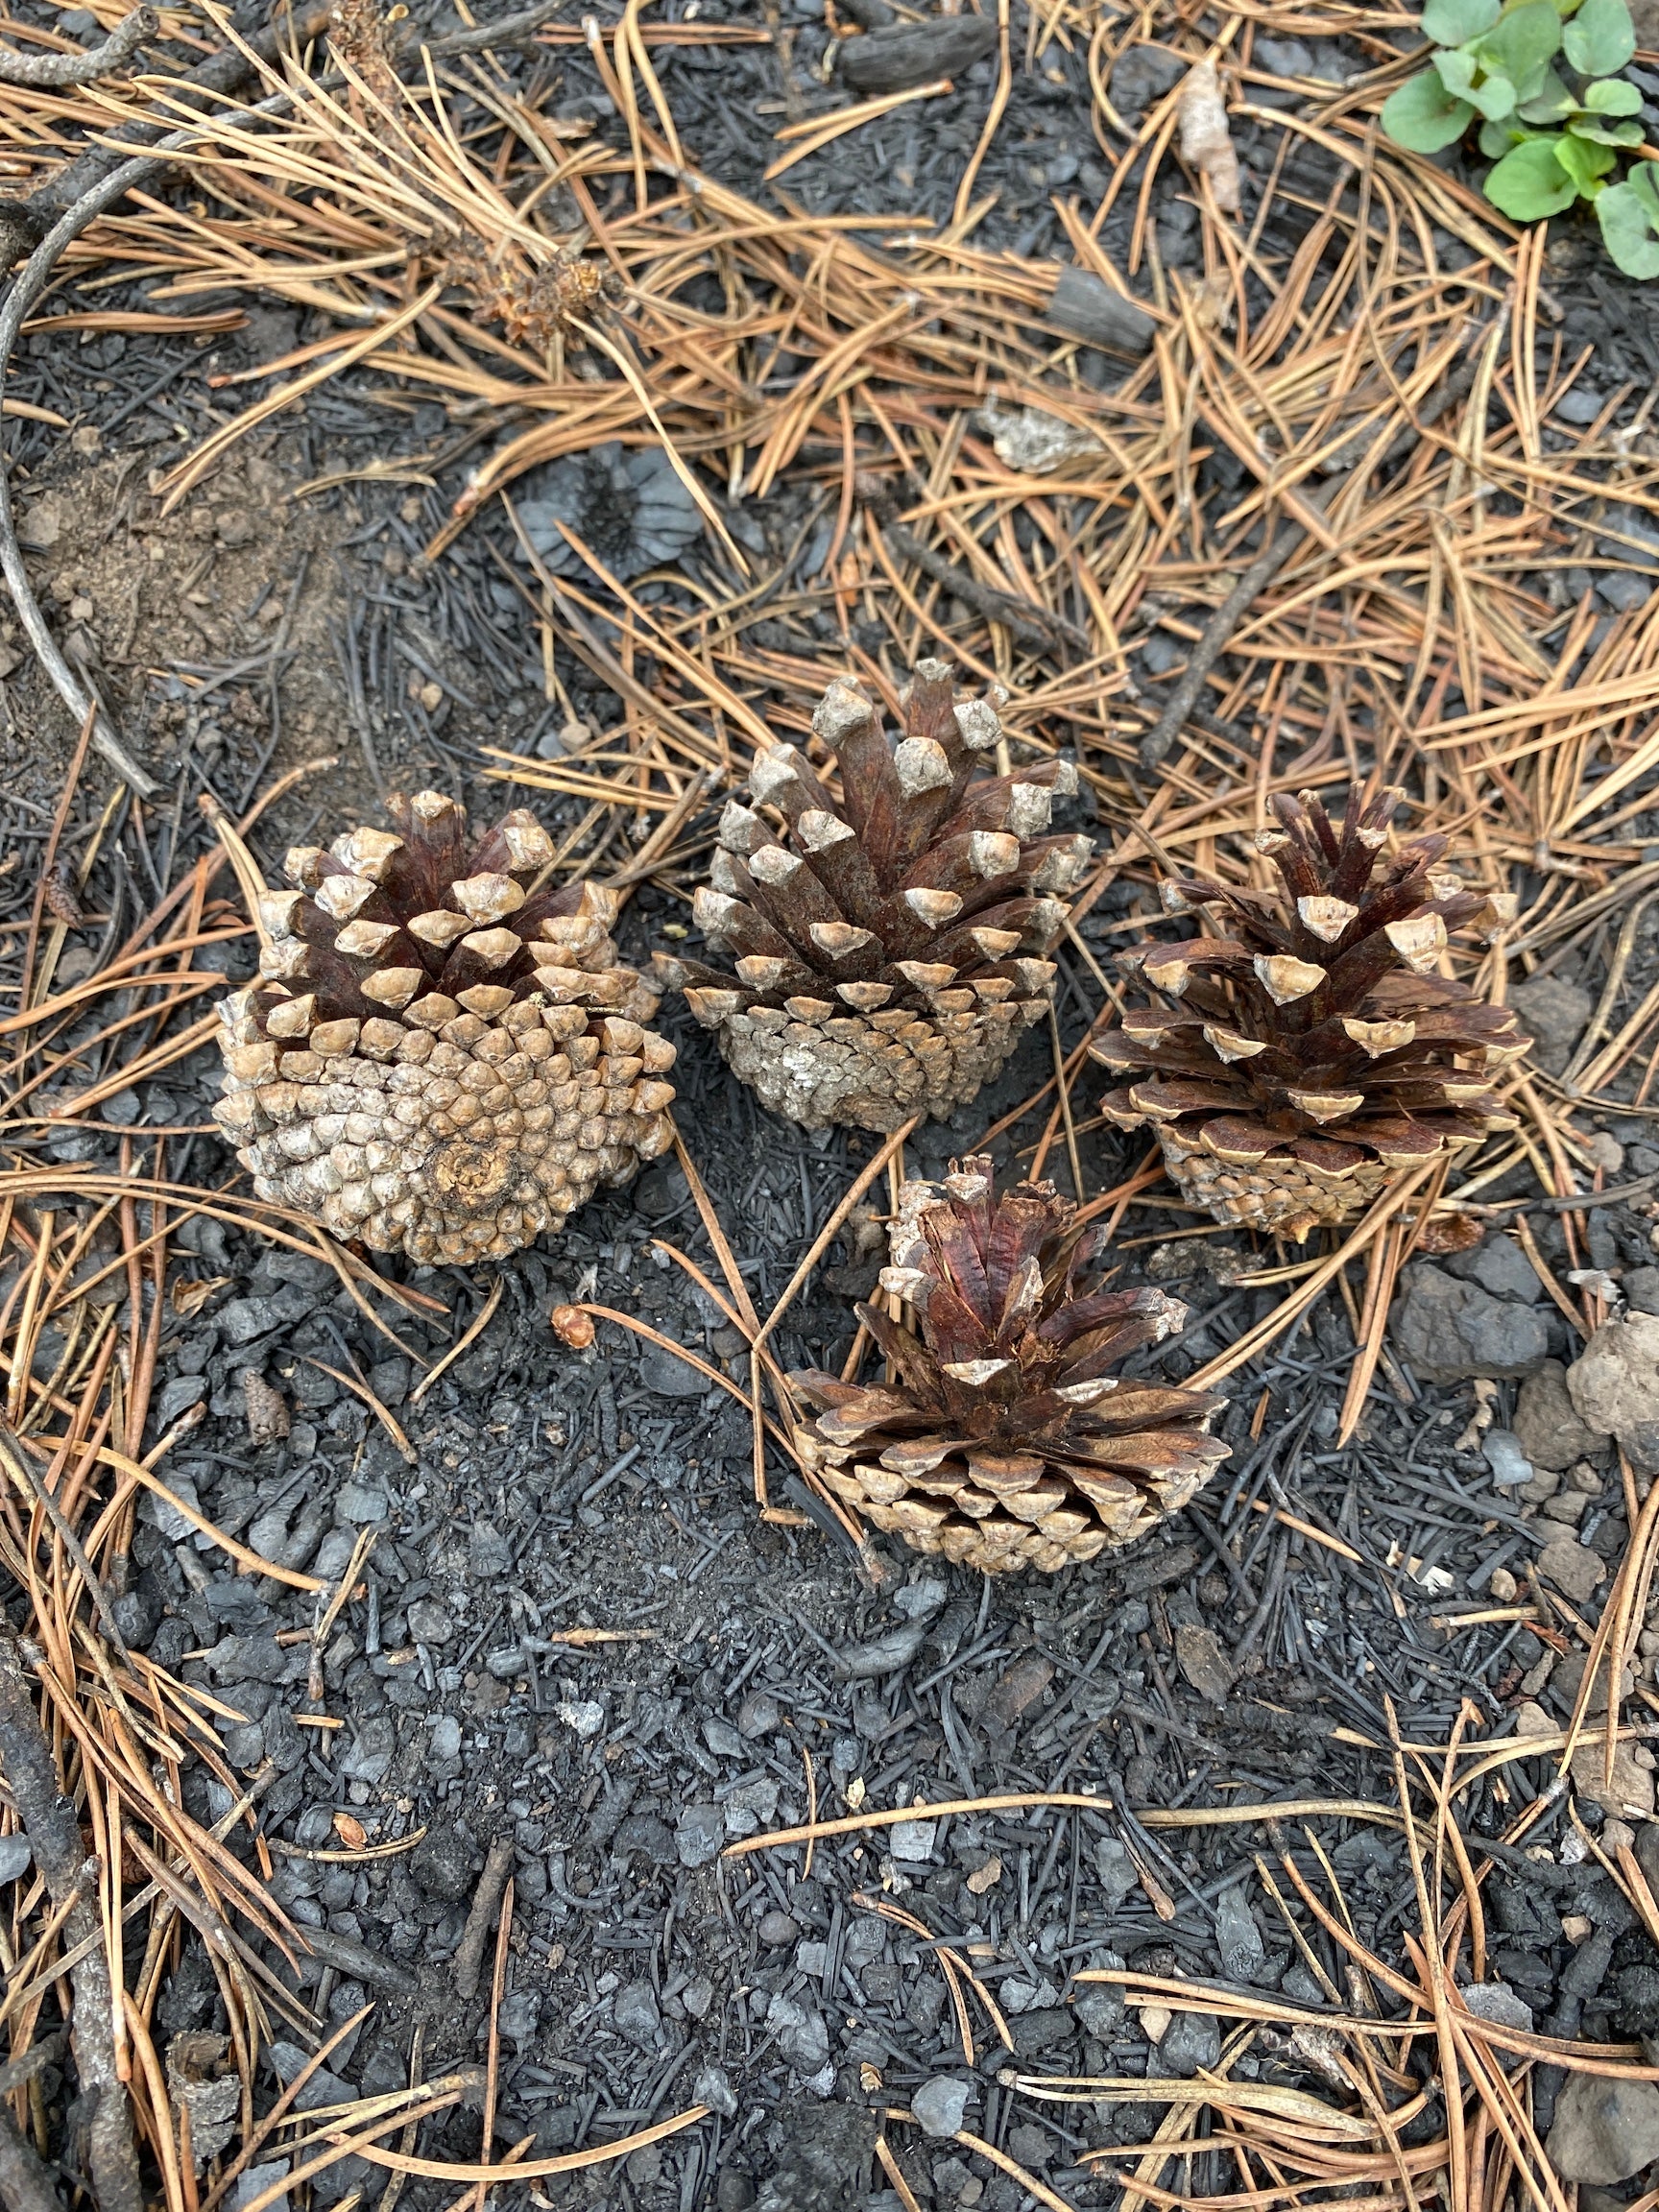 four lodgepole cones lay on the ground. They are visibly opened with large gaps between their scales